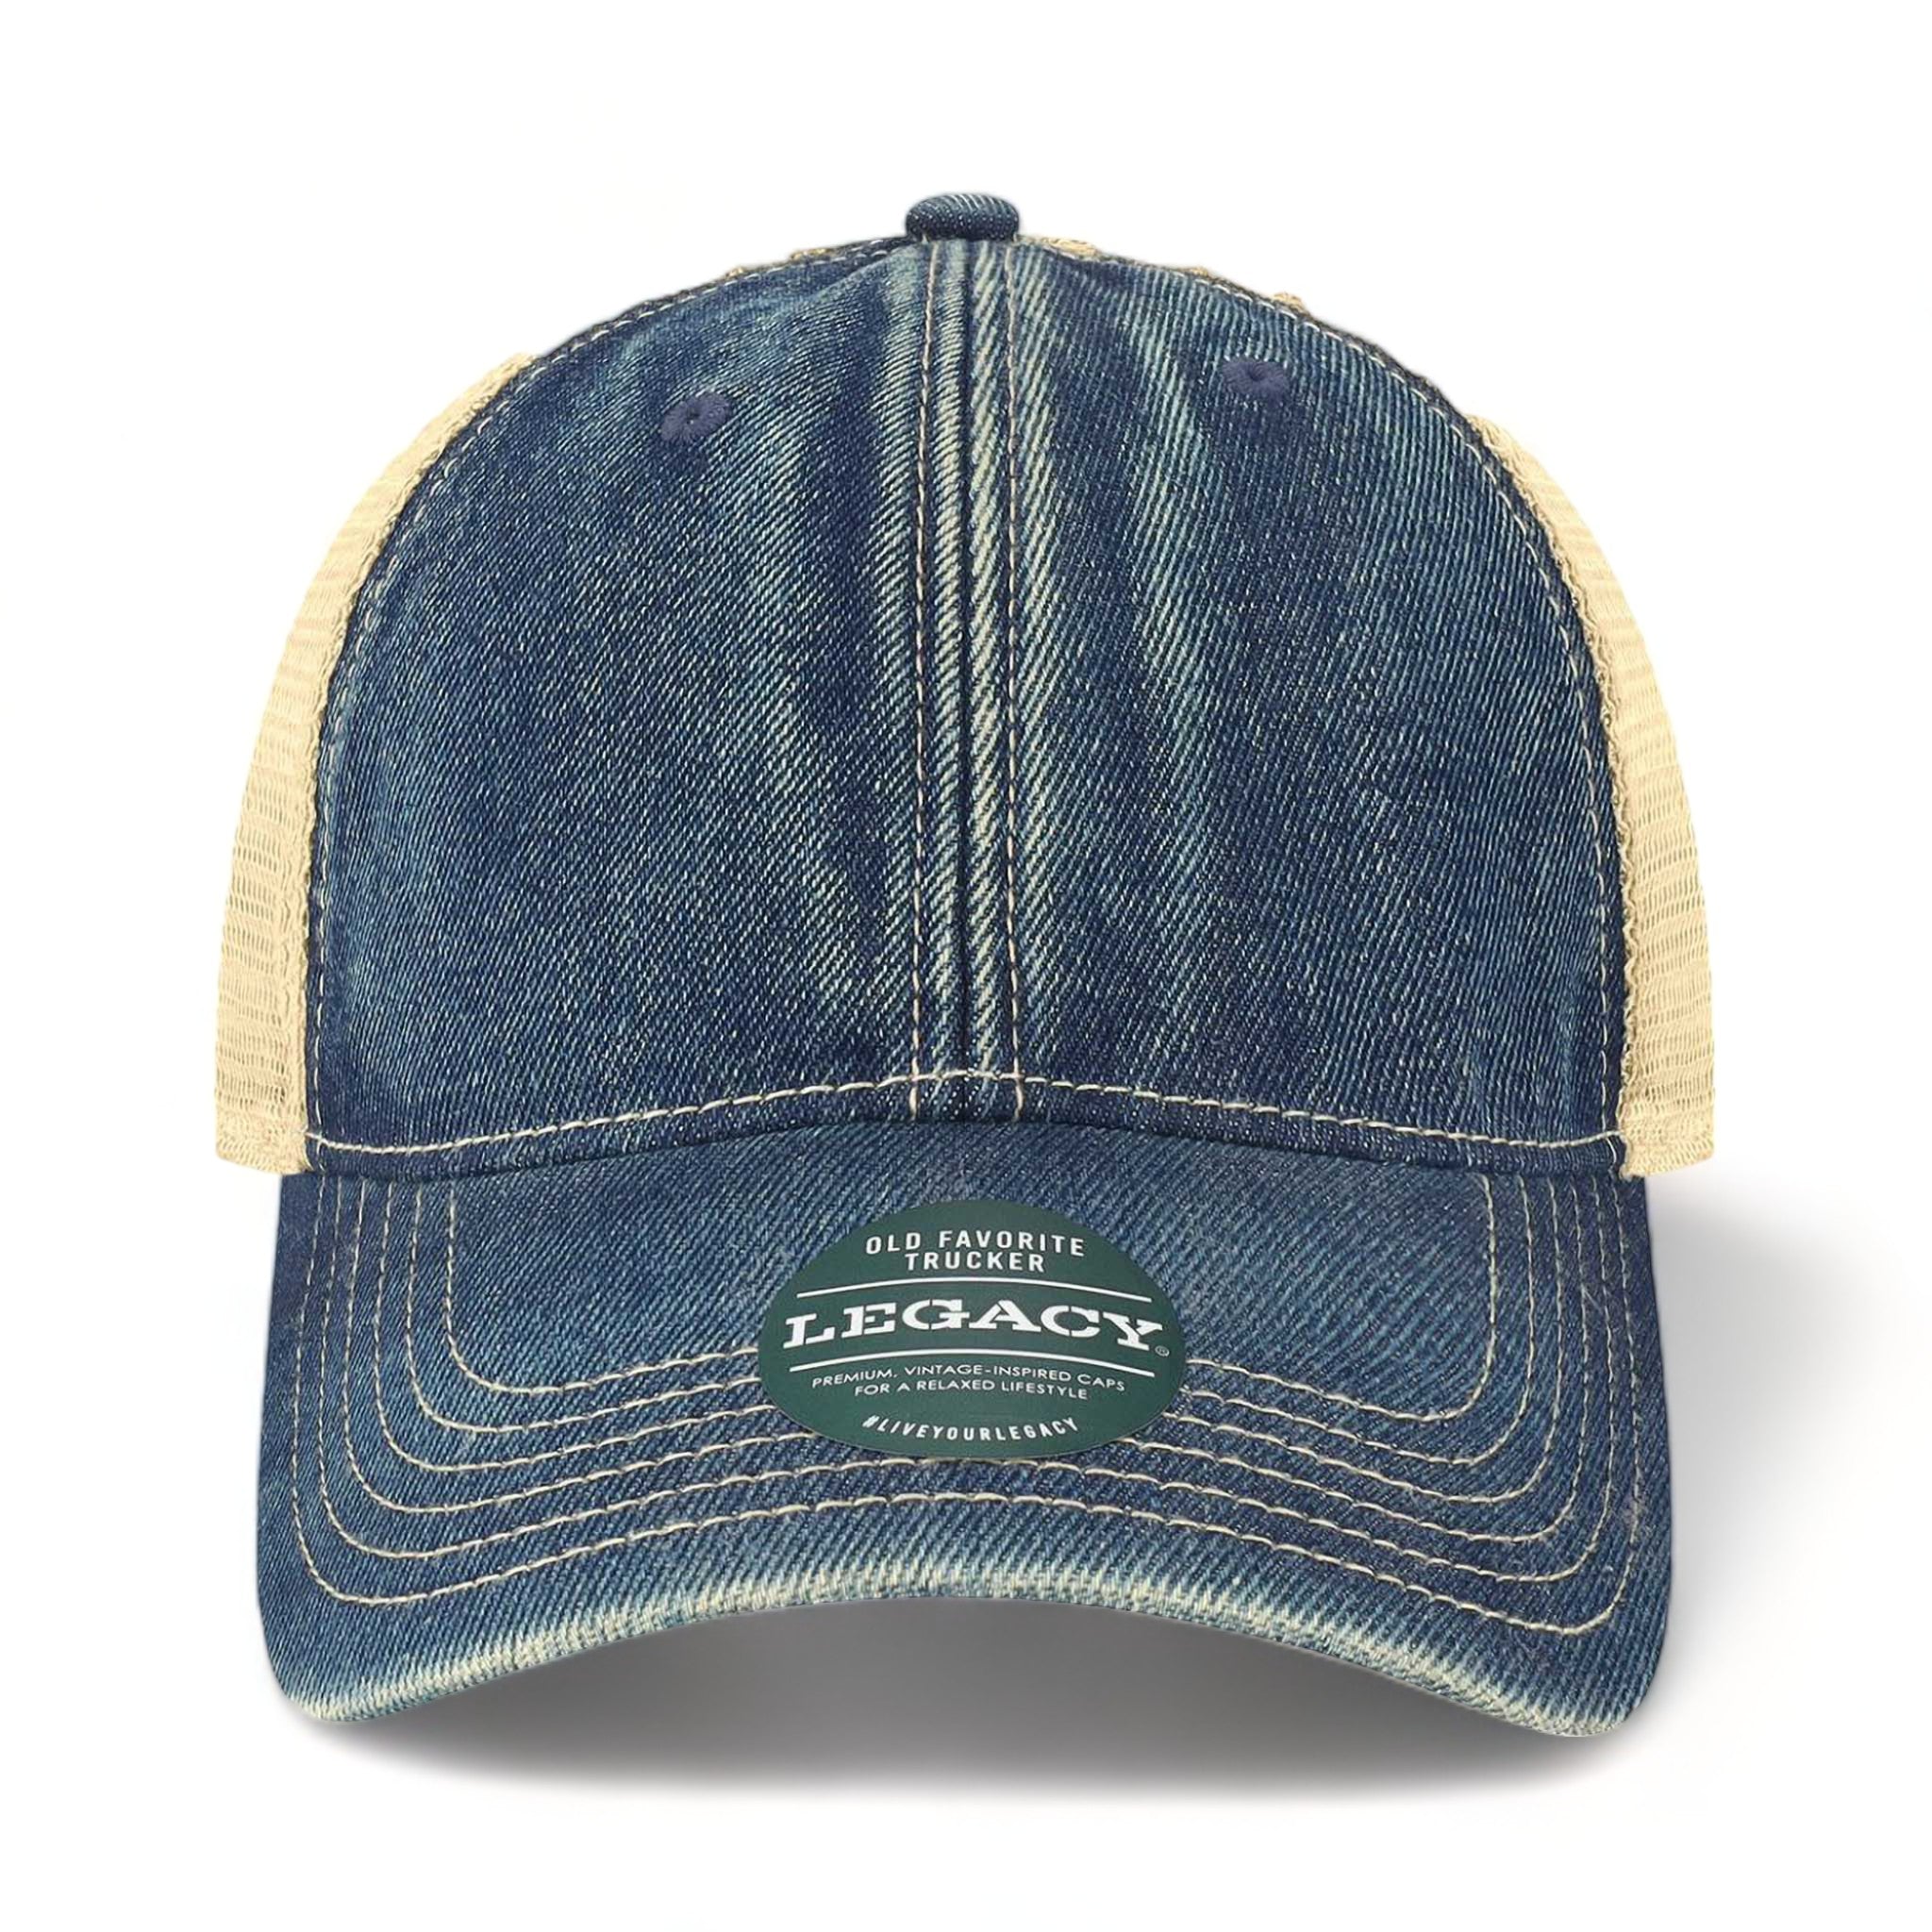 Front view of LEGACY OFA custom hat in blue denim and khaki